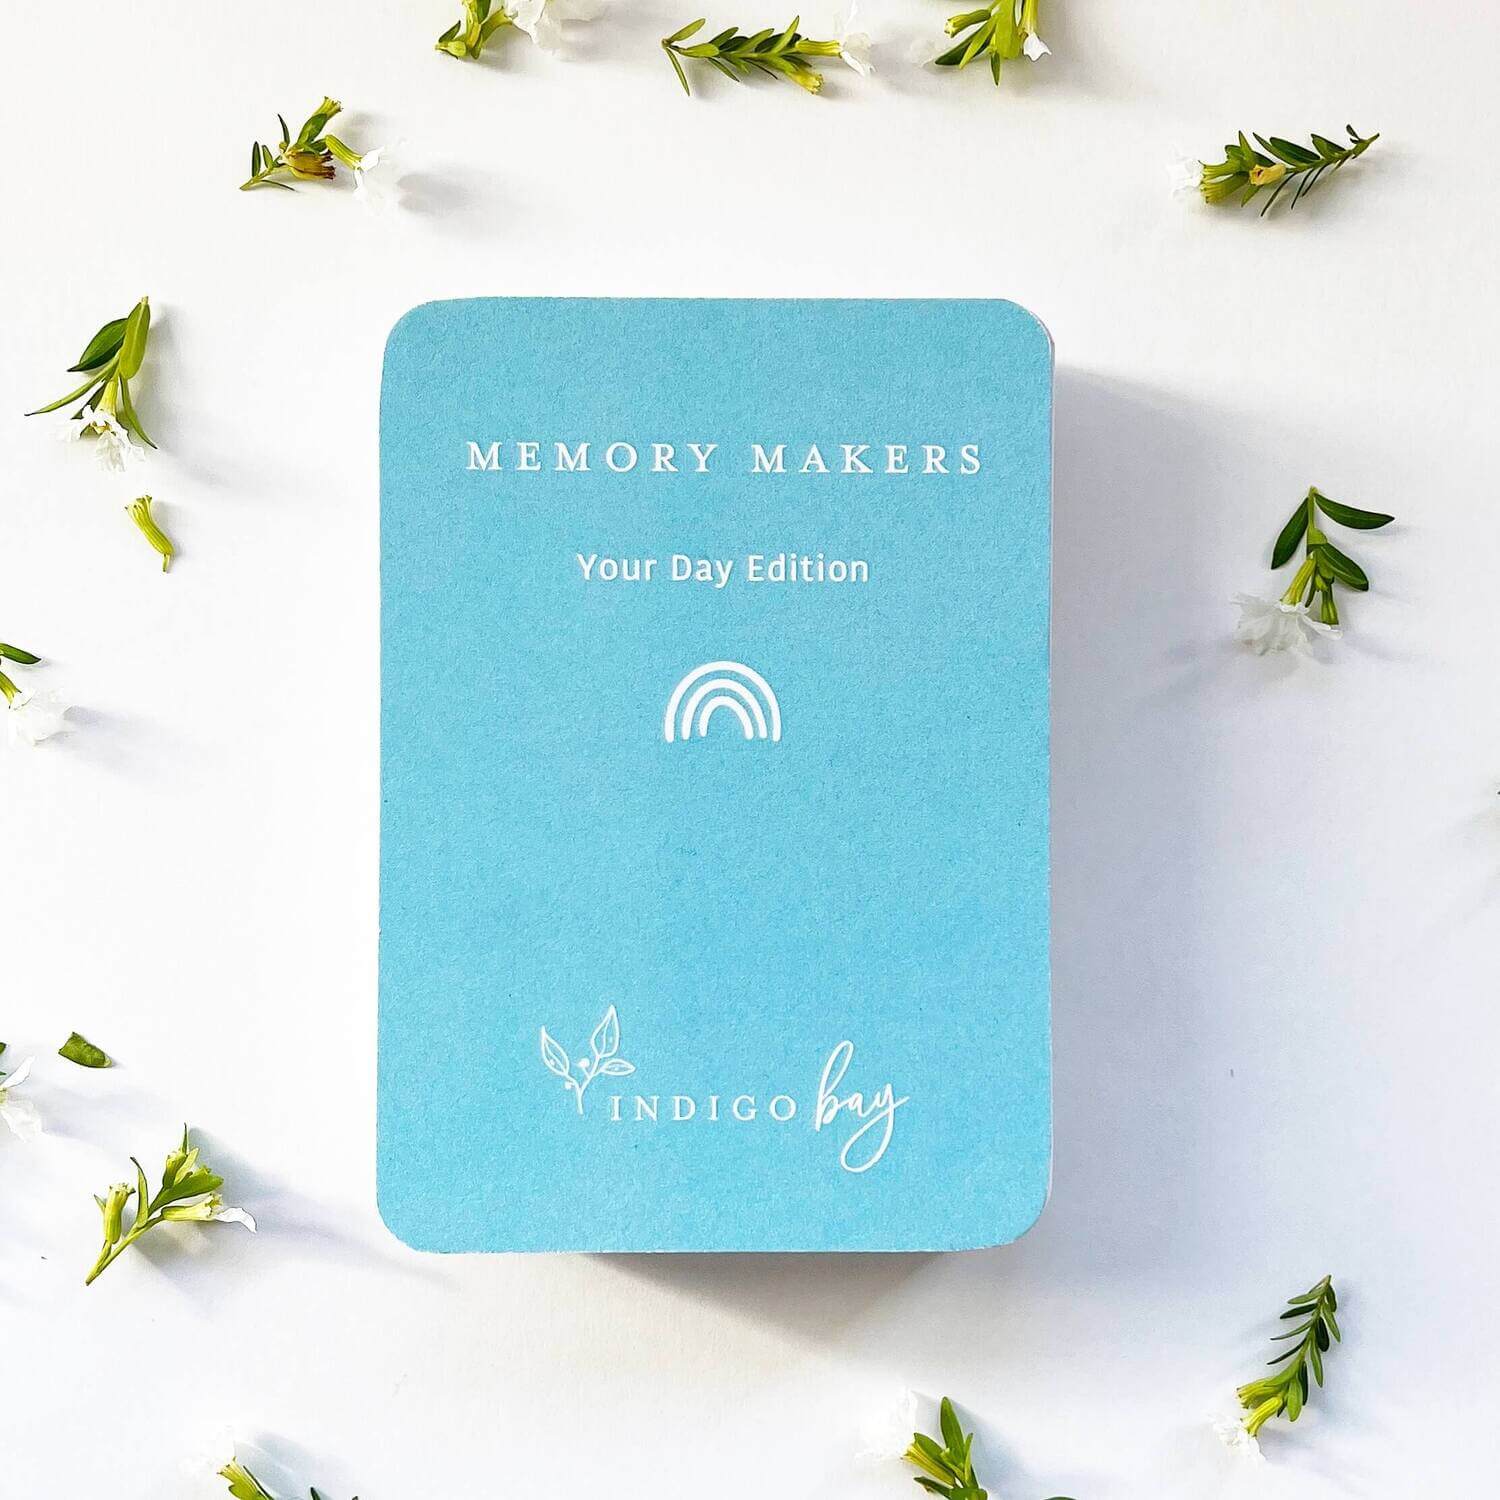 Memory Makers Your Day Edition card deck | Journal Cards to encourage connection